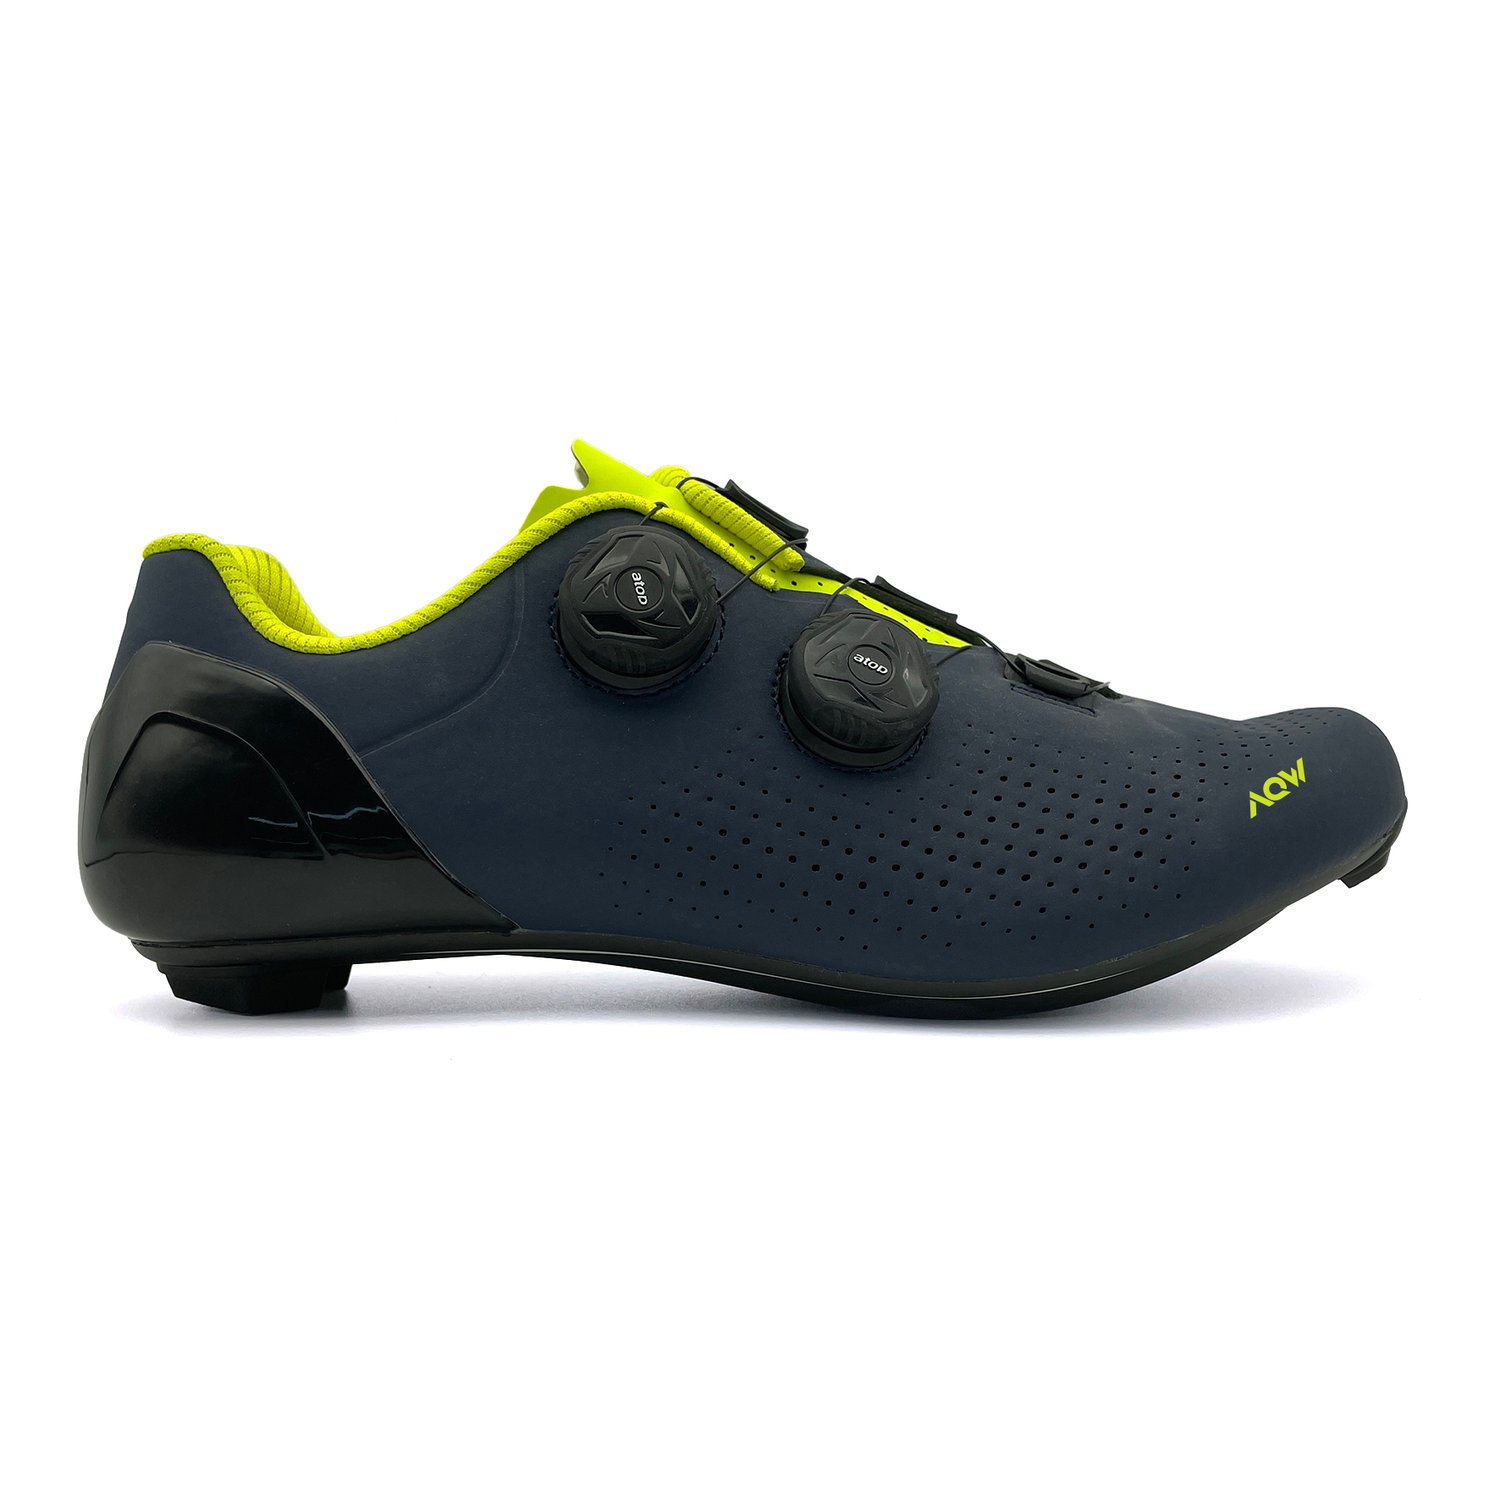 Causal Road Cycling Shoes